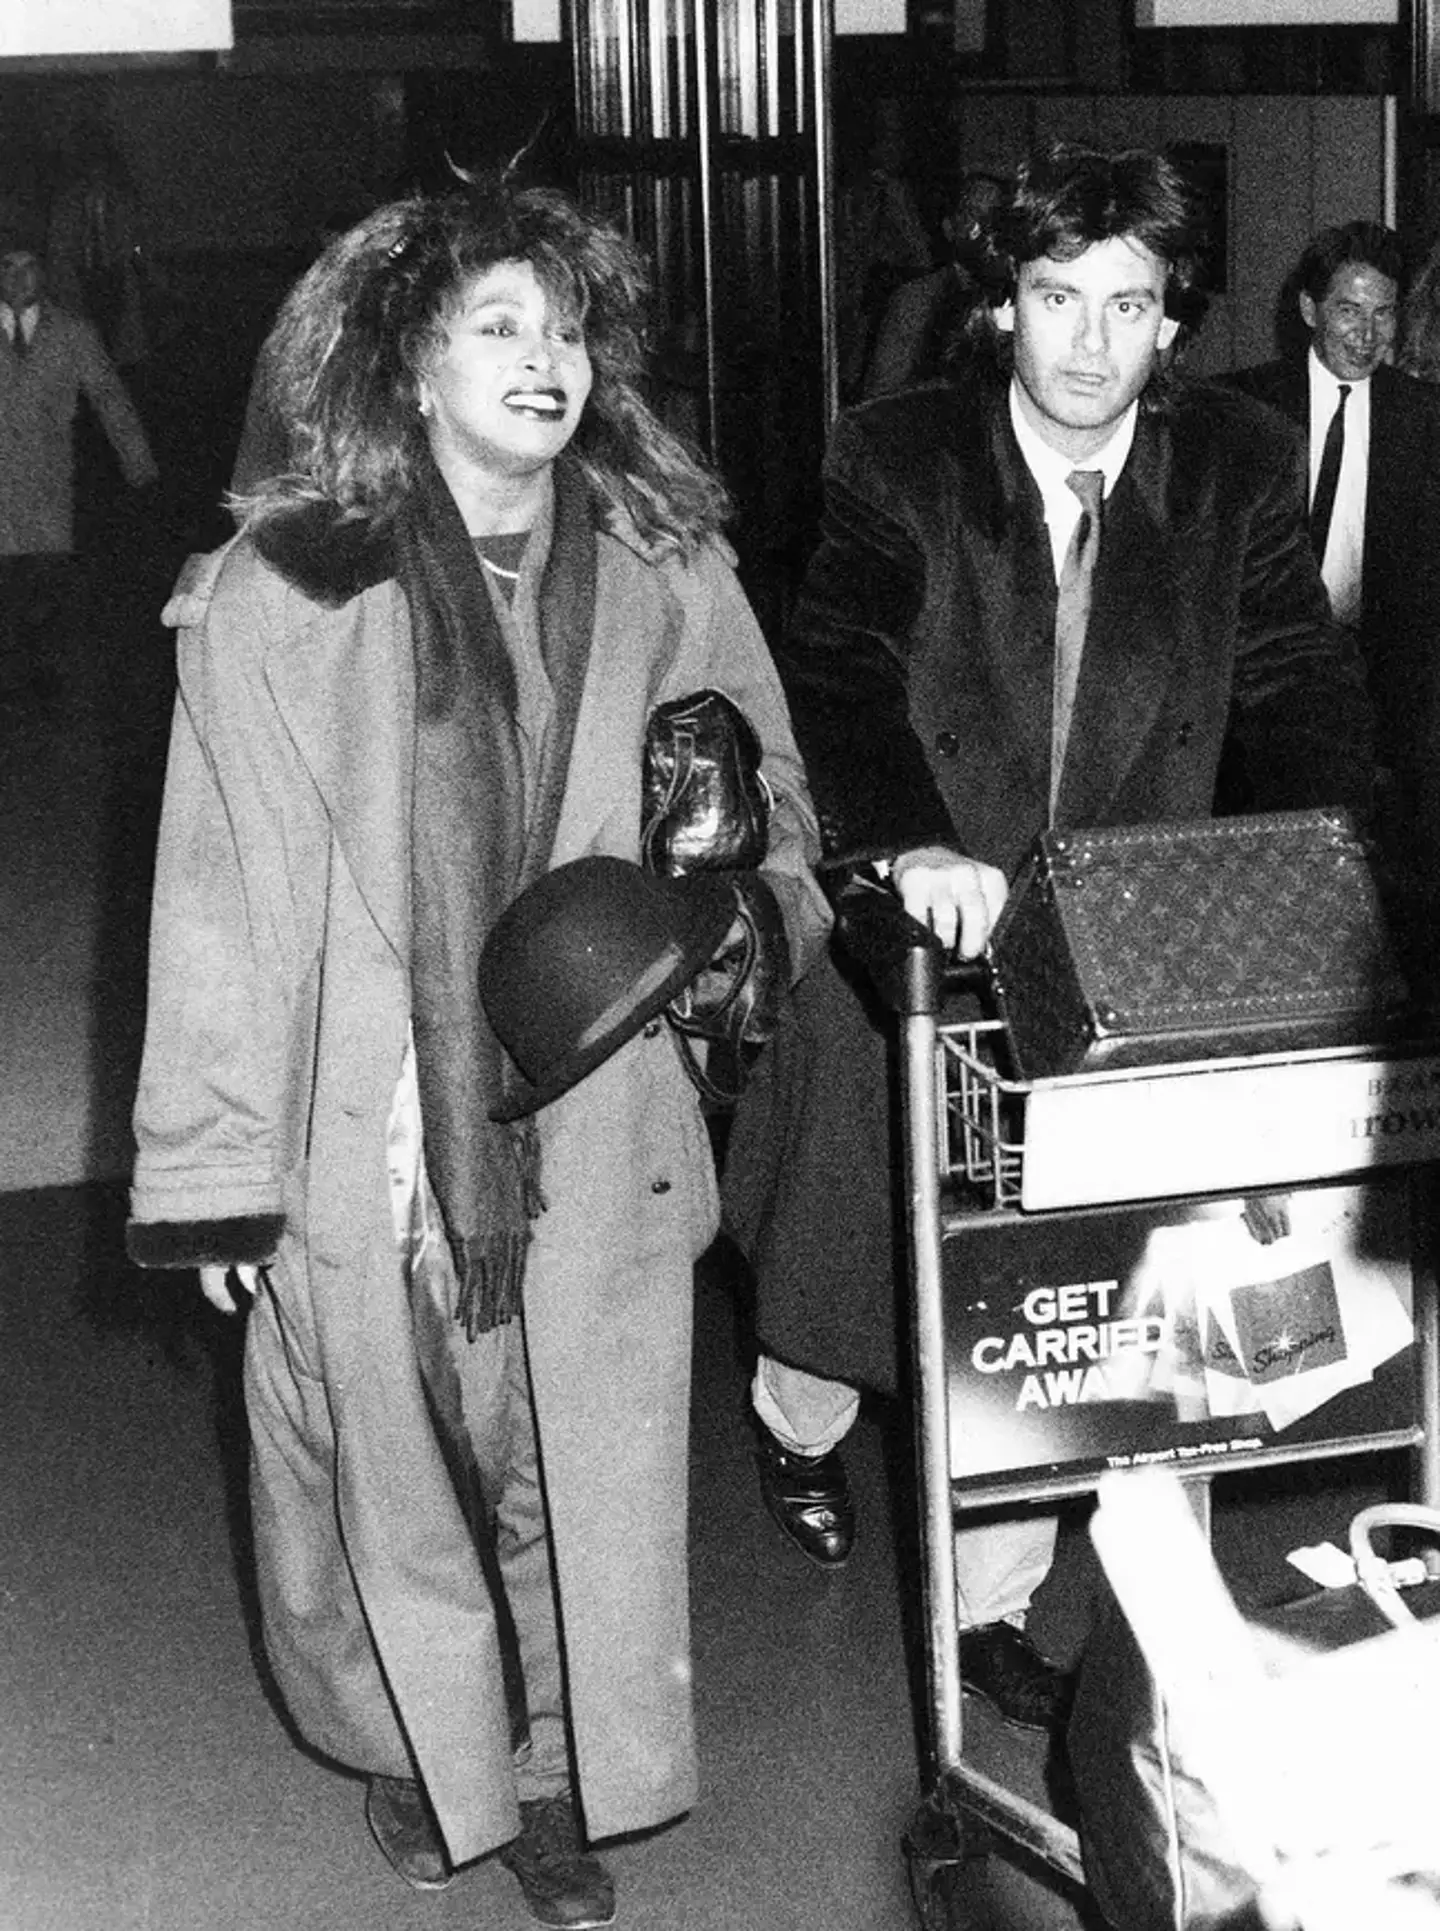 Tina Turner and Erwin Bach met in 1986 and were together for 37 years.